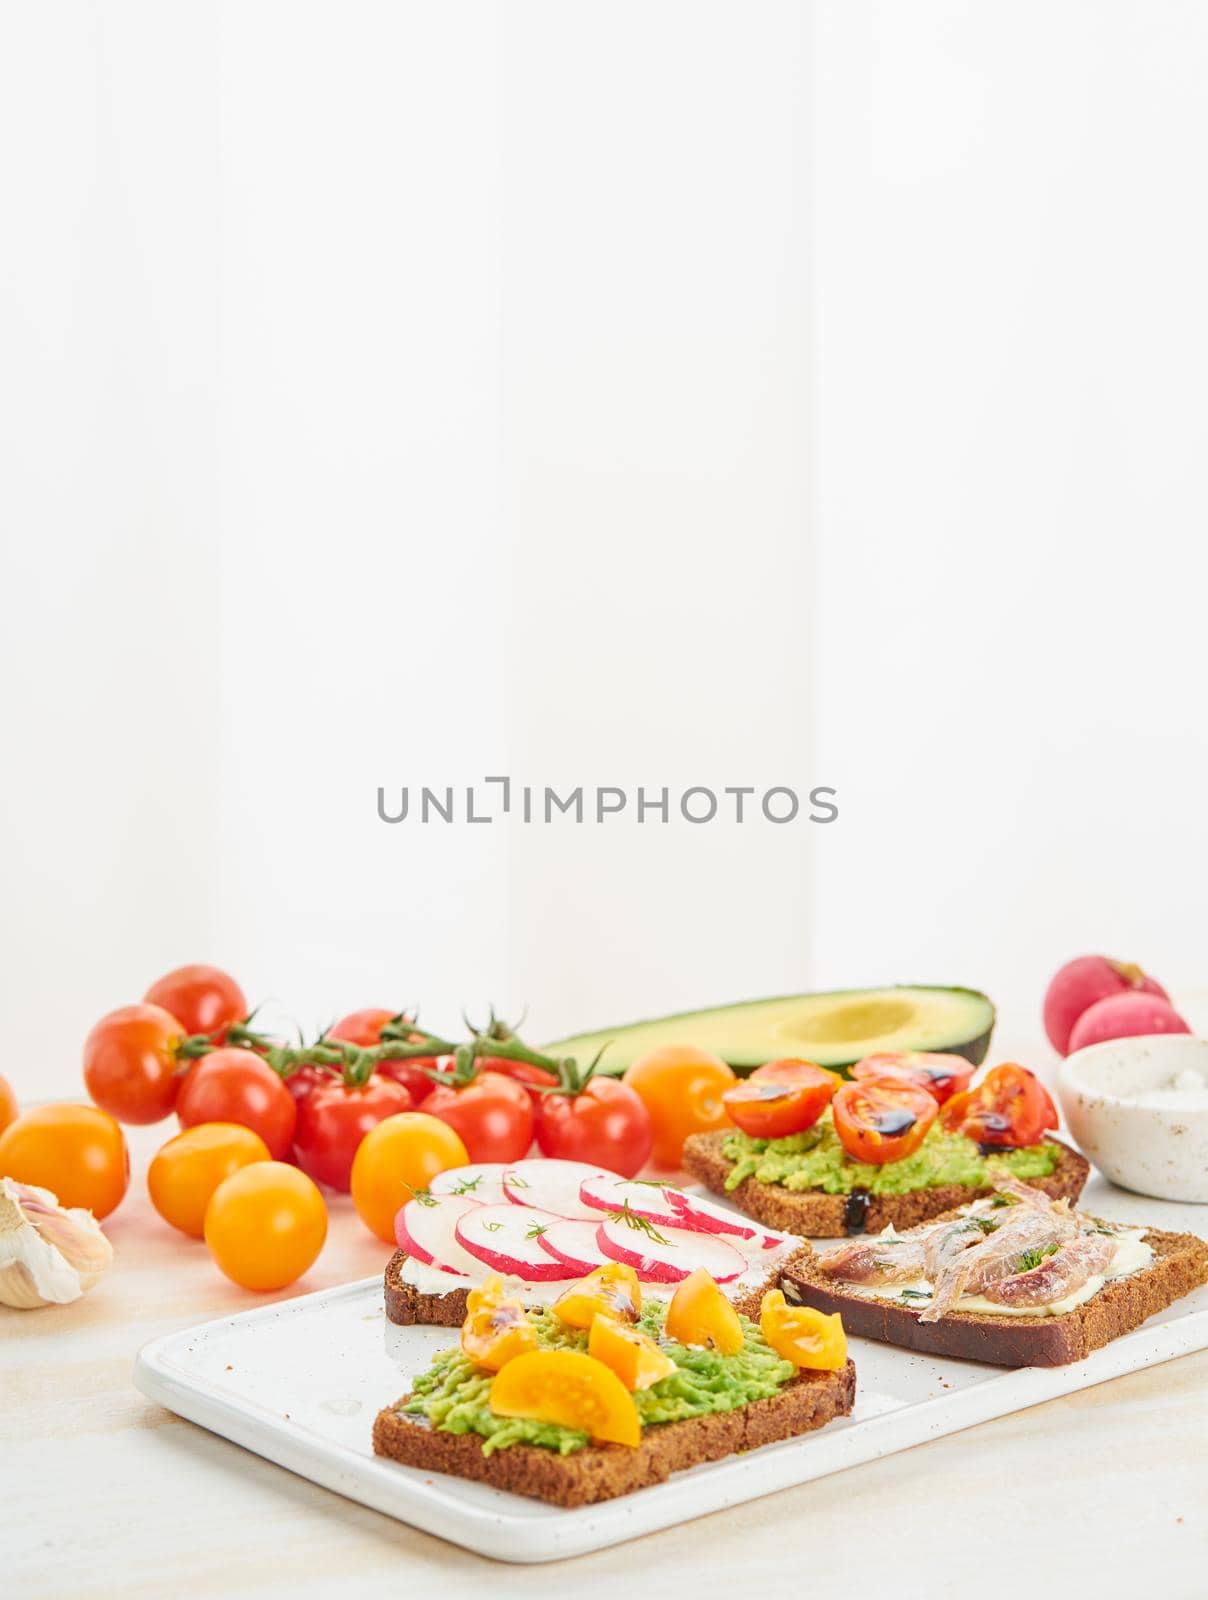 Set of smorrebrods with fish, anchovies, avocado, tomatoes, radish. Side view, copy space, white background.